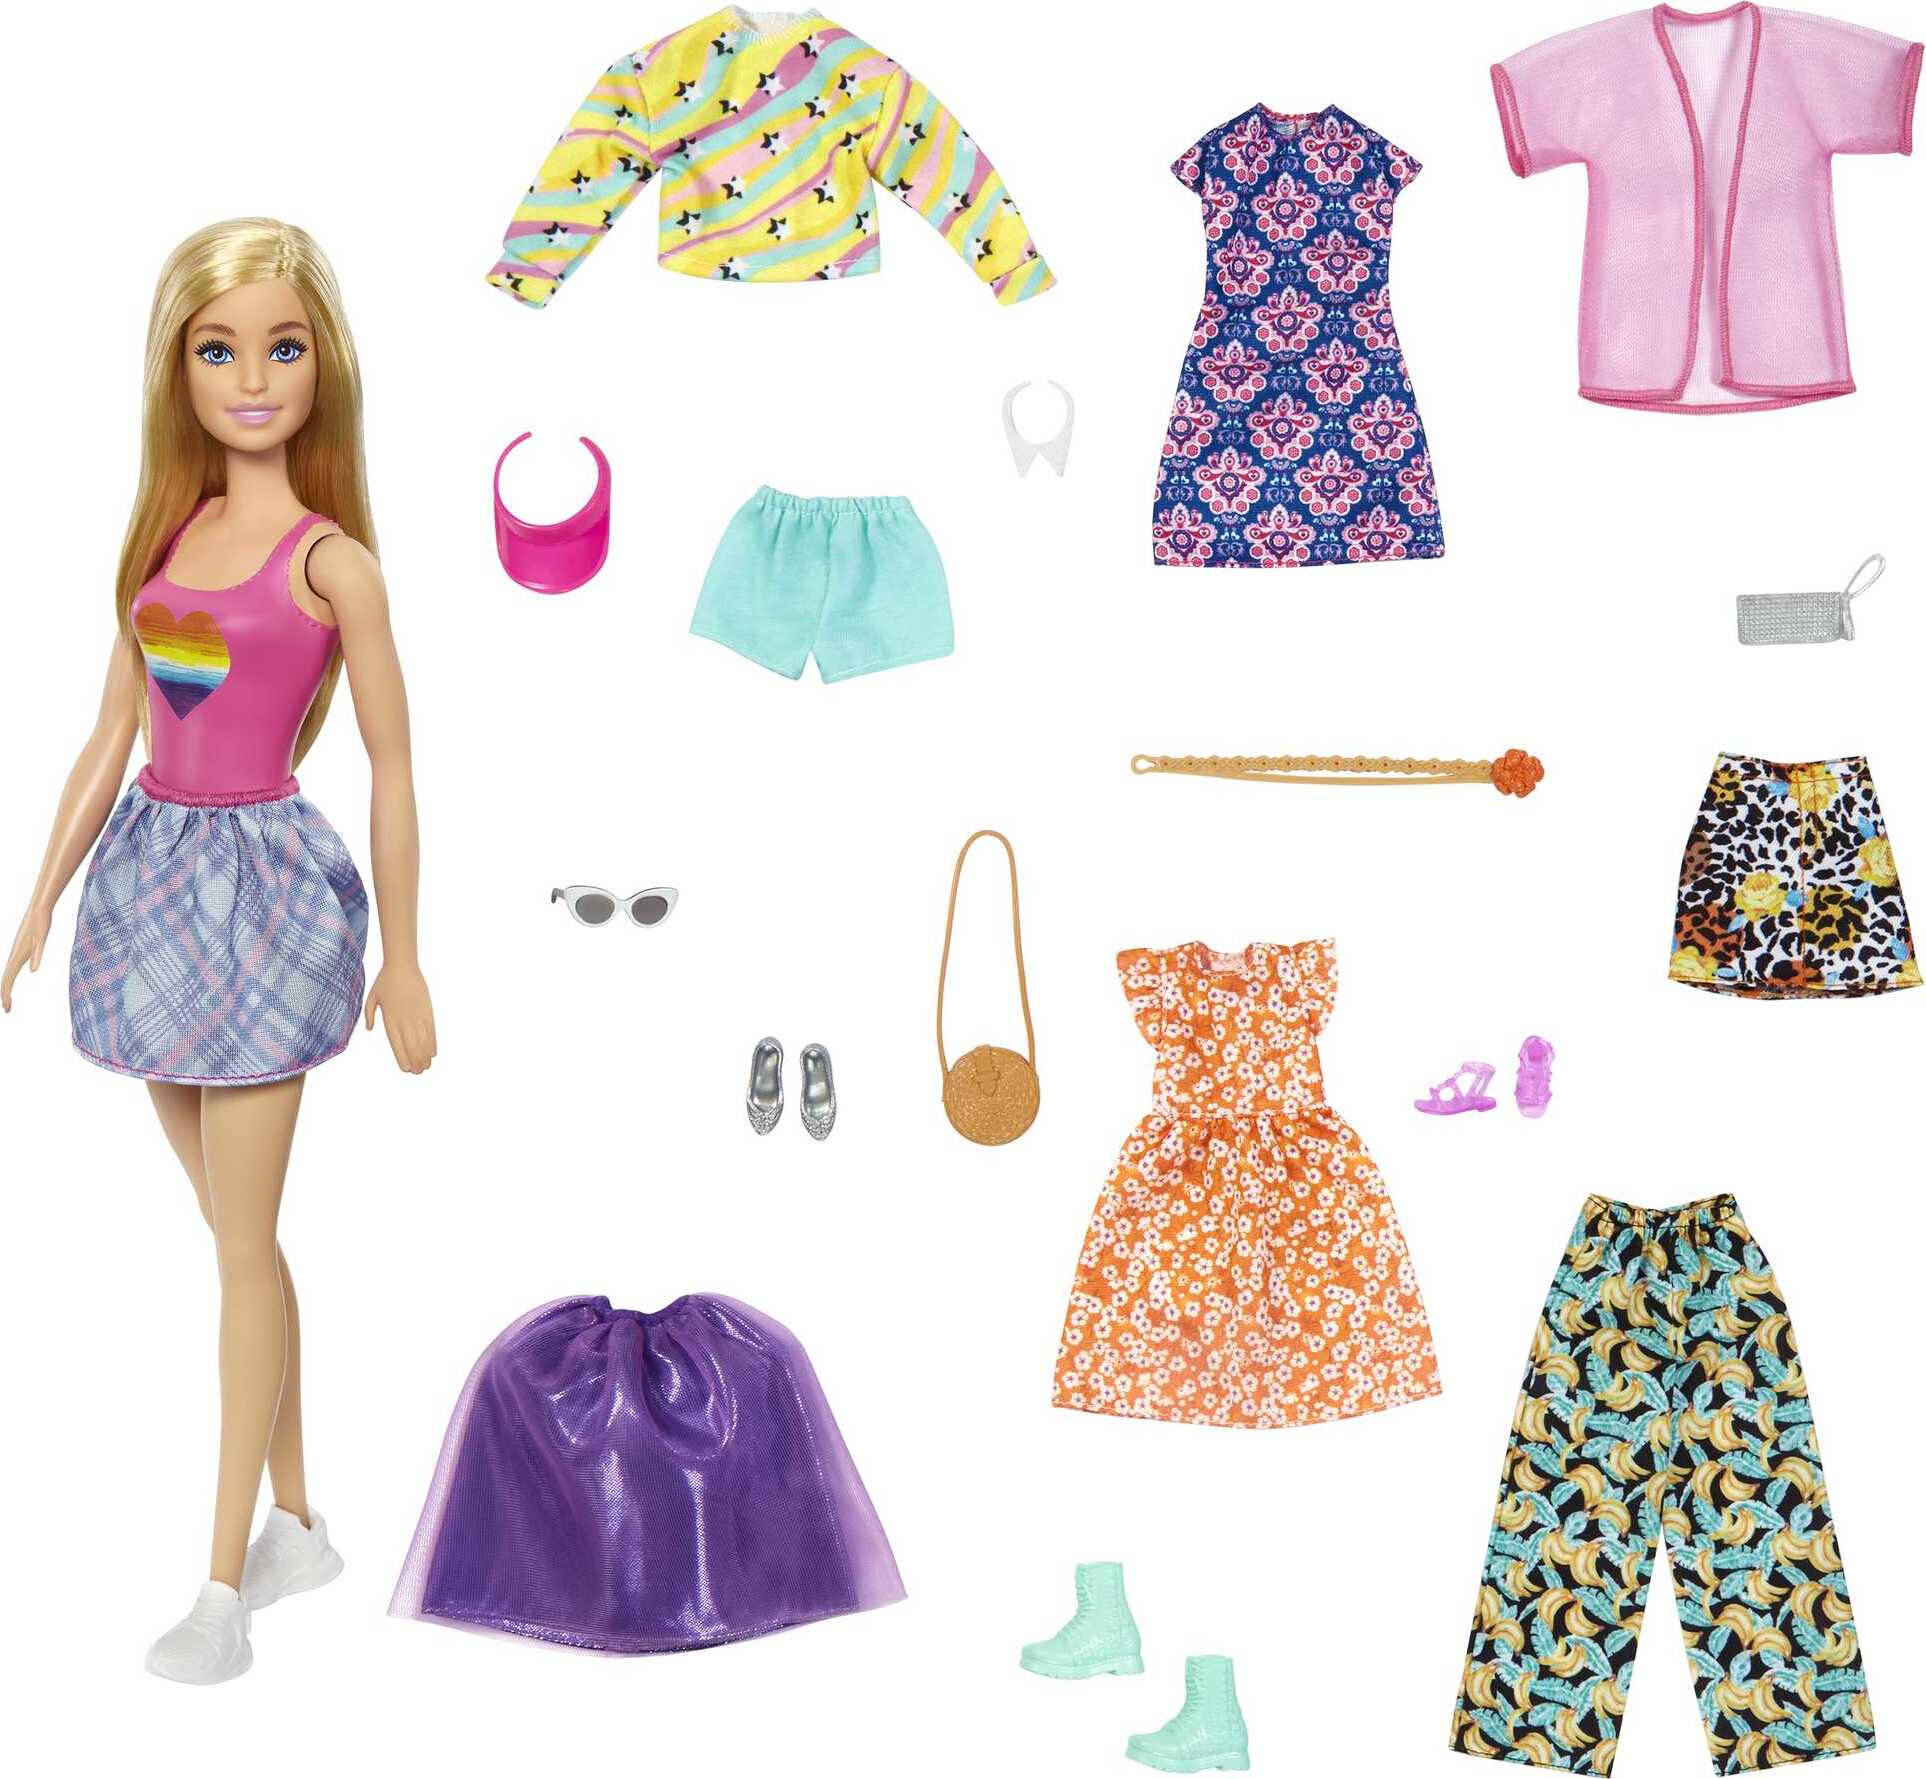 Barbie Doll with 19-Piece Fashion Pack, Clothes & Accessories for 7 Outfits, Blonde Hair - image 1 of 6